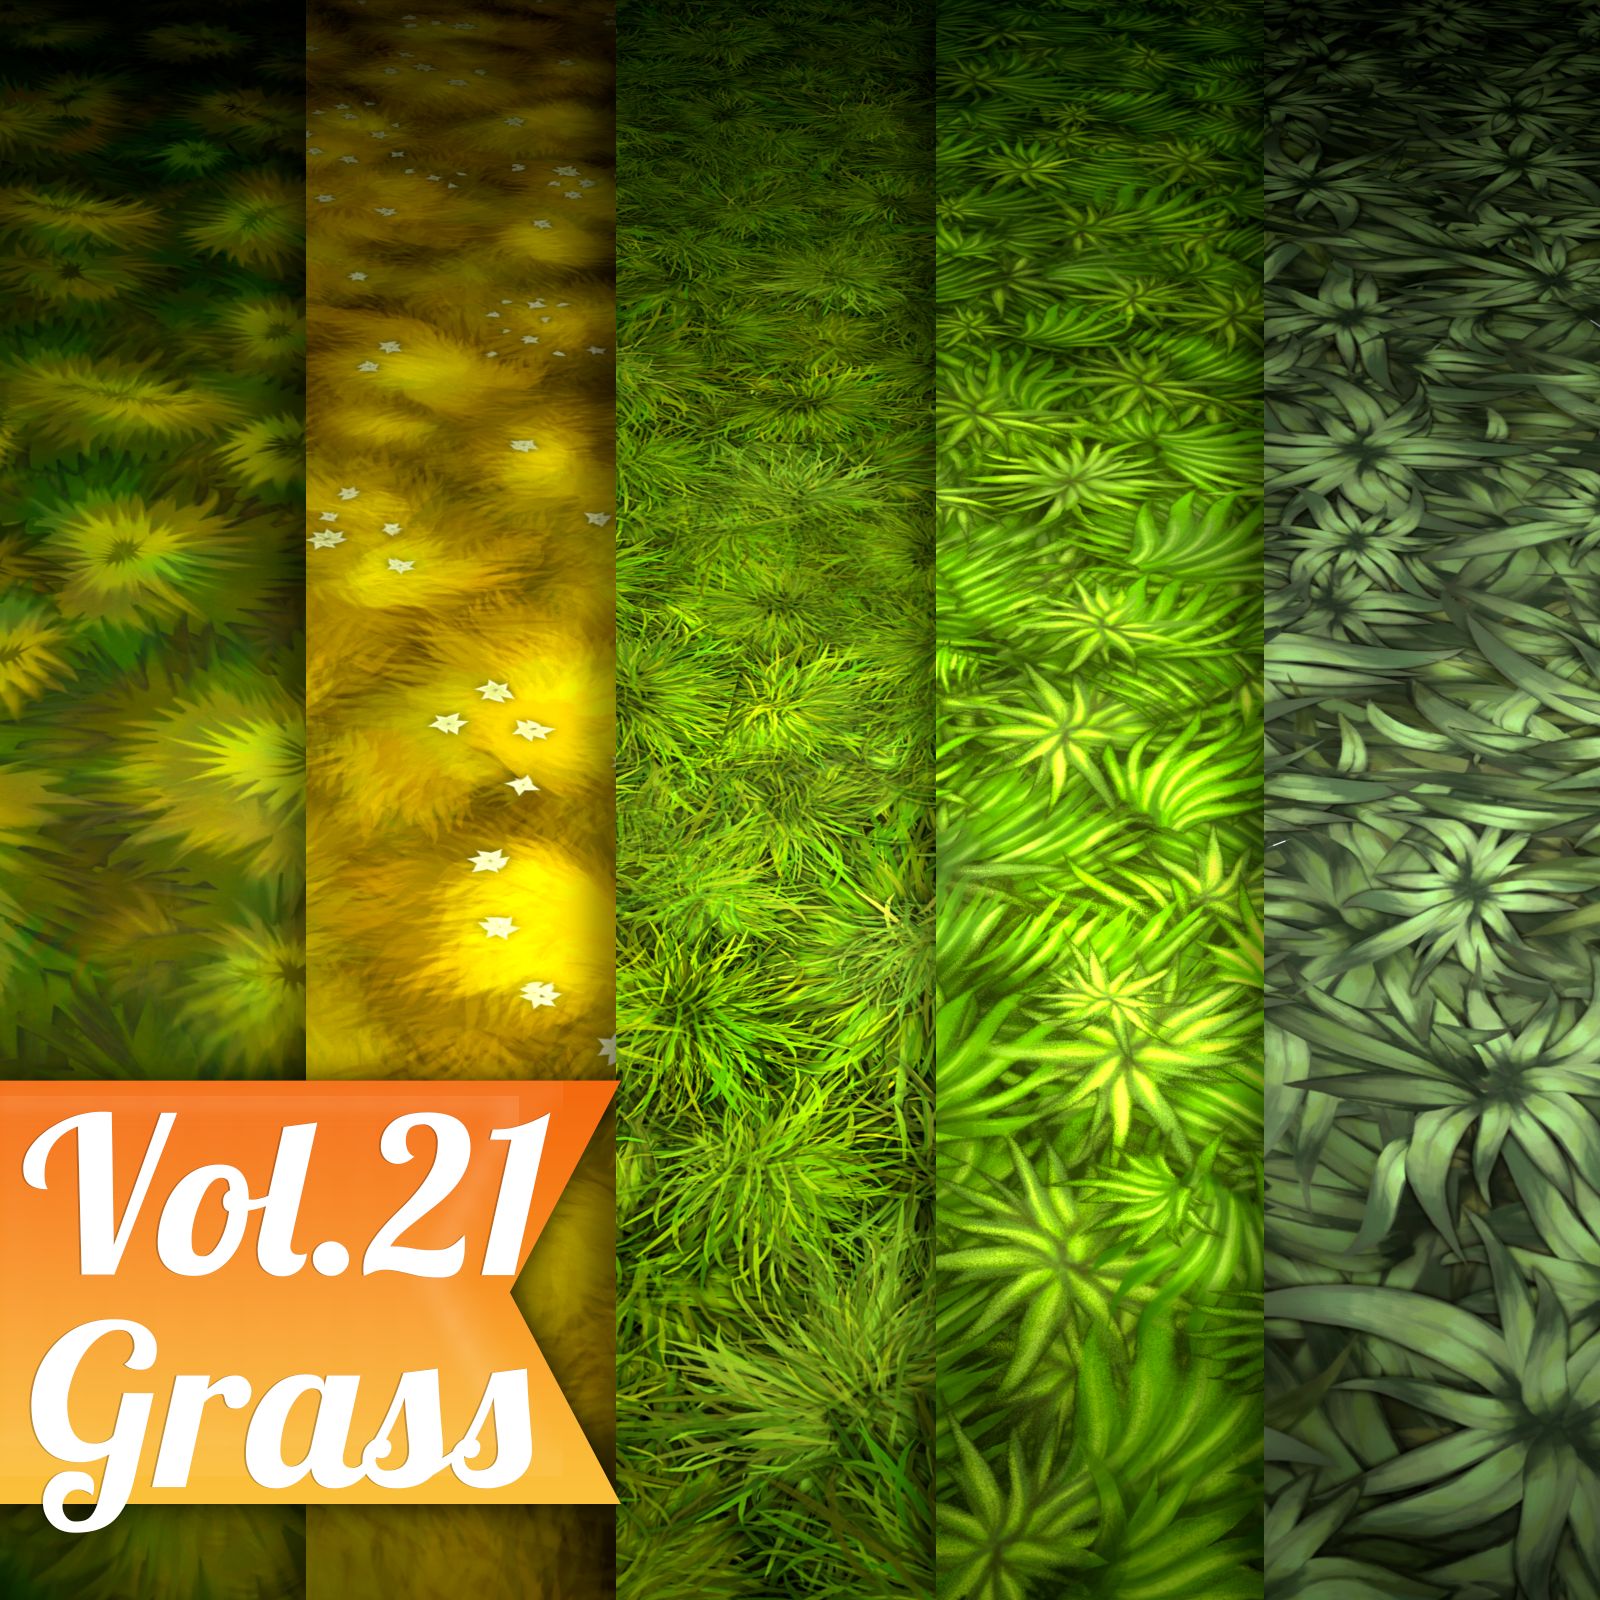 Grass Vol.21 - Hand Painted Texture Pack - LowlyPoly